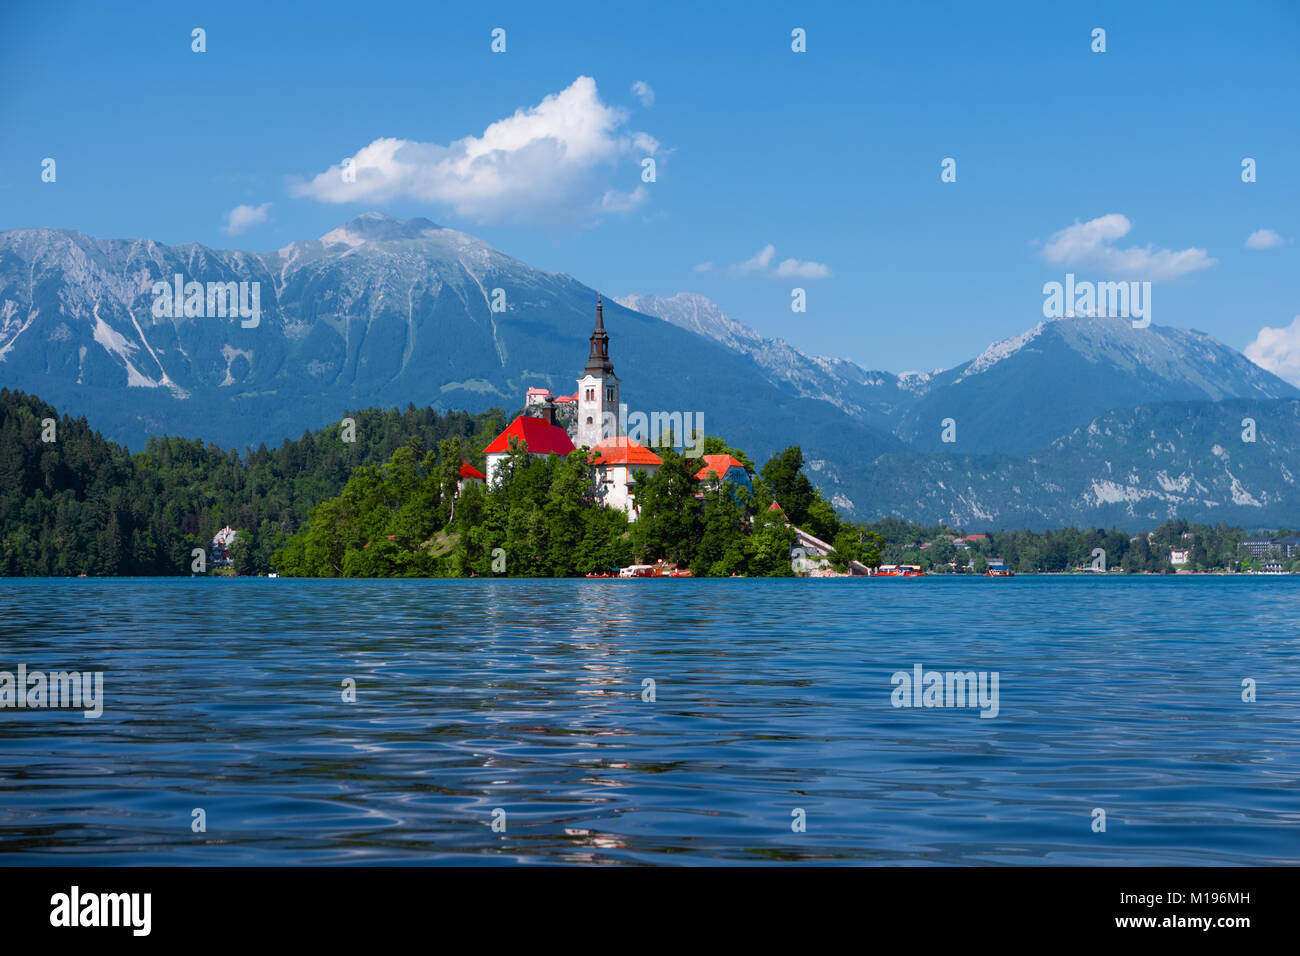 Lake Bled, Alps, Slovenia, Europe. Summer scenery. Mountain alpine lake. Island with church in Lake Bled. Beautiful landscape. Castle and mountains in Stock Photo